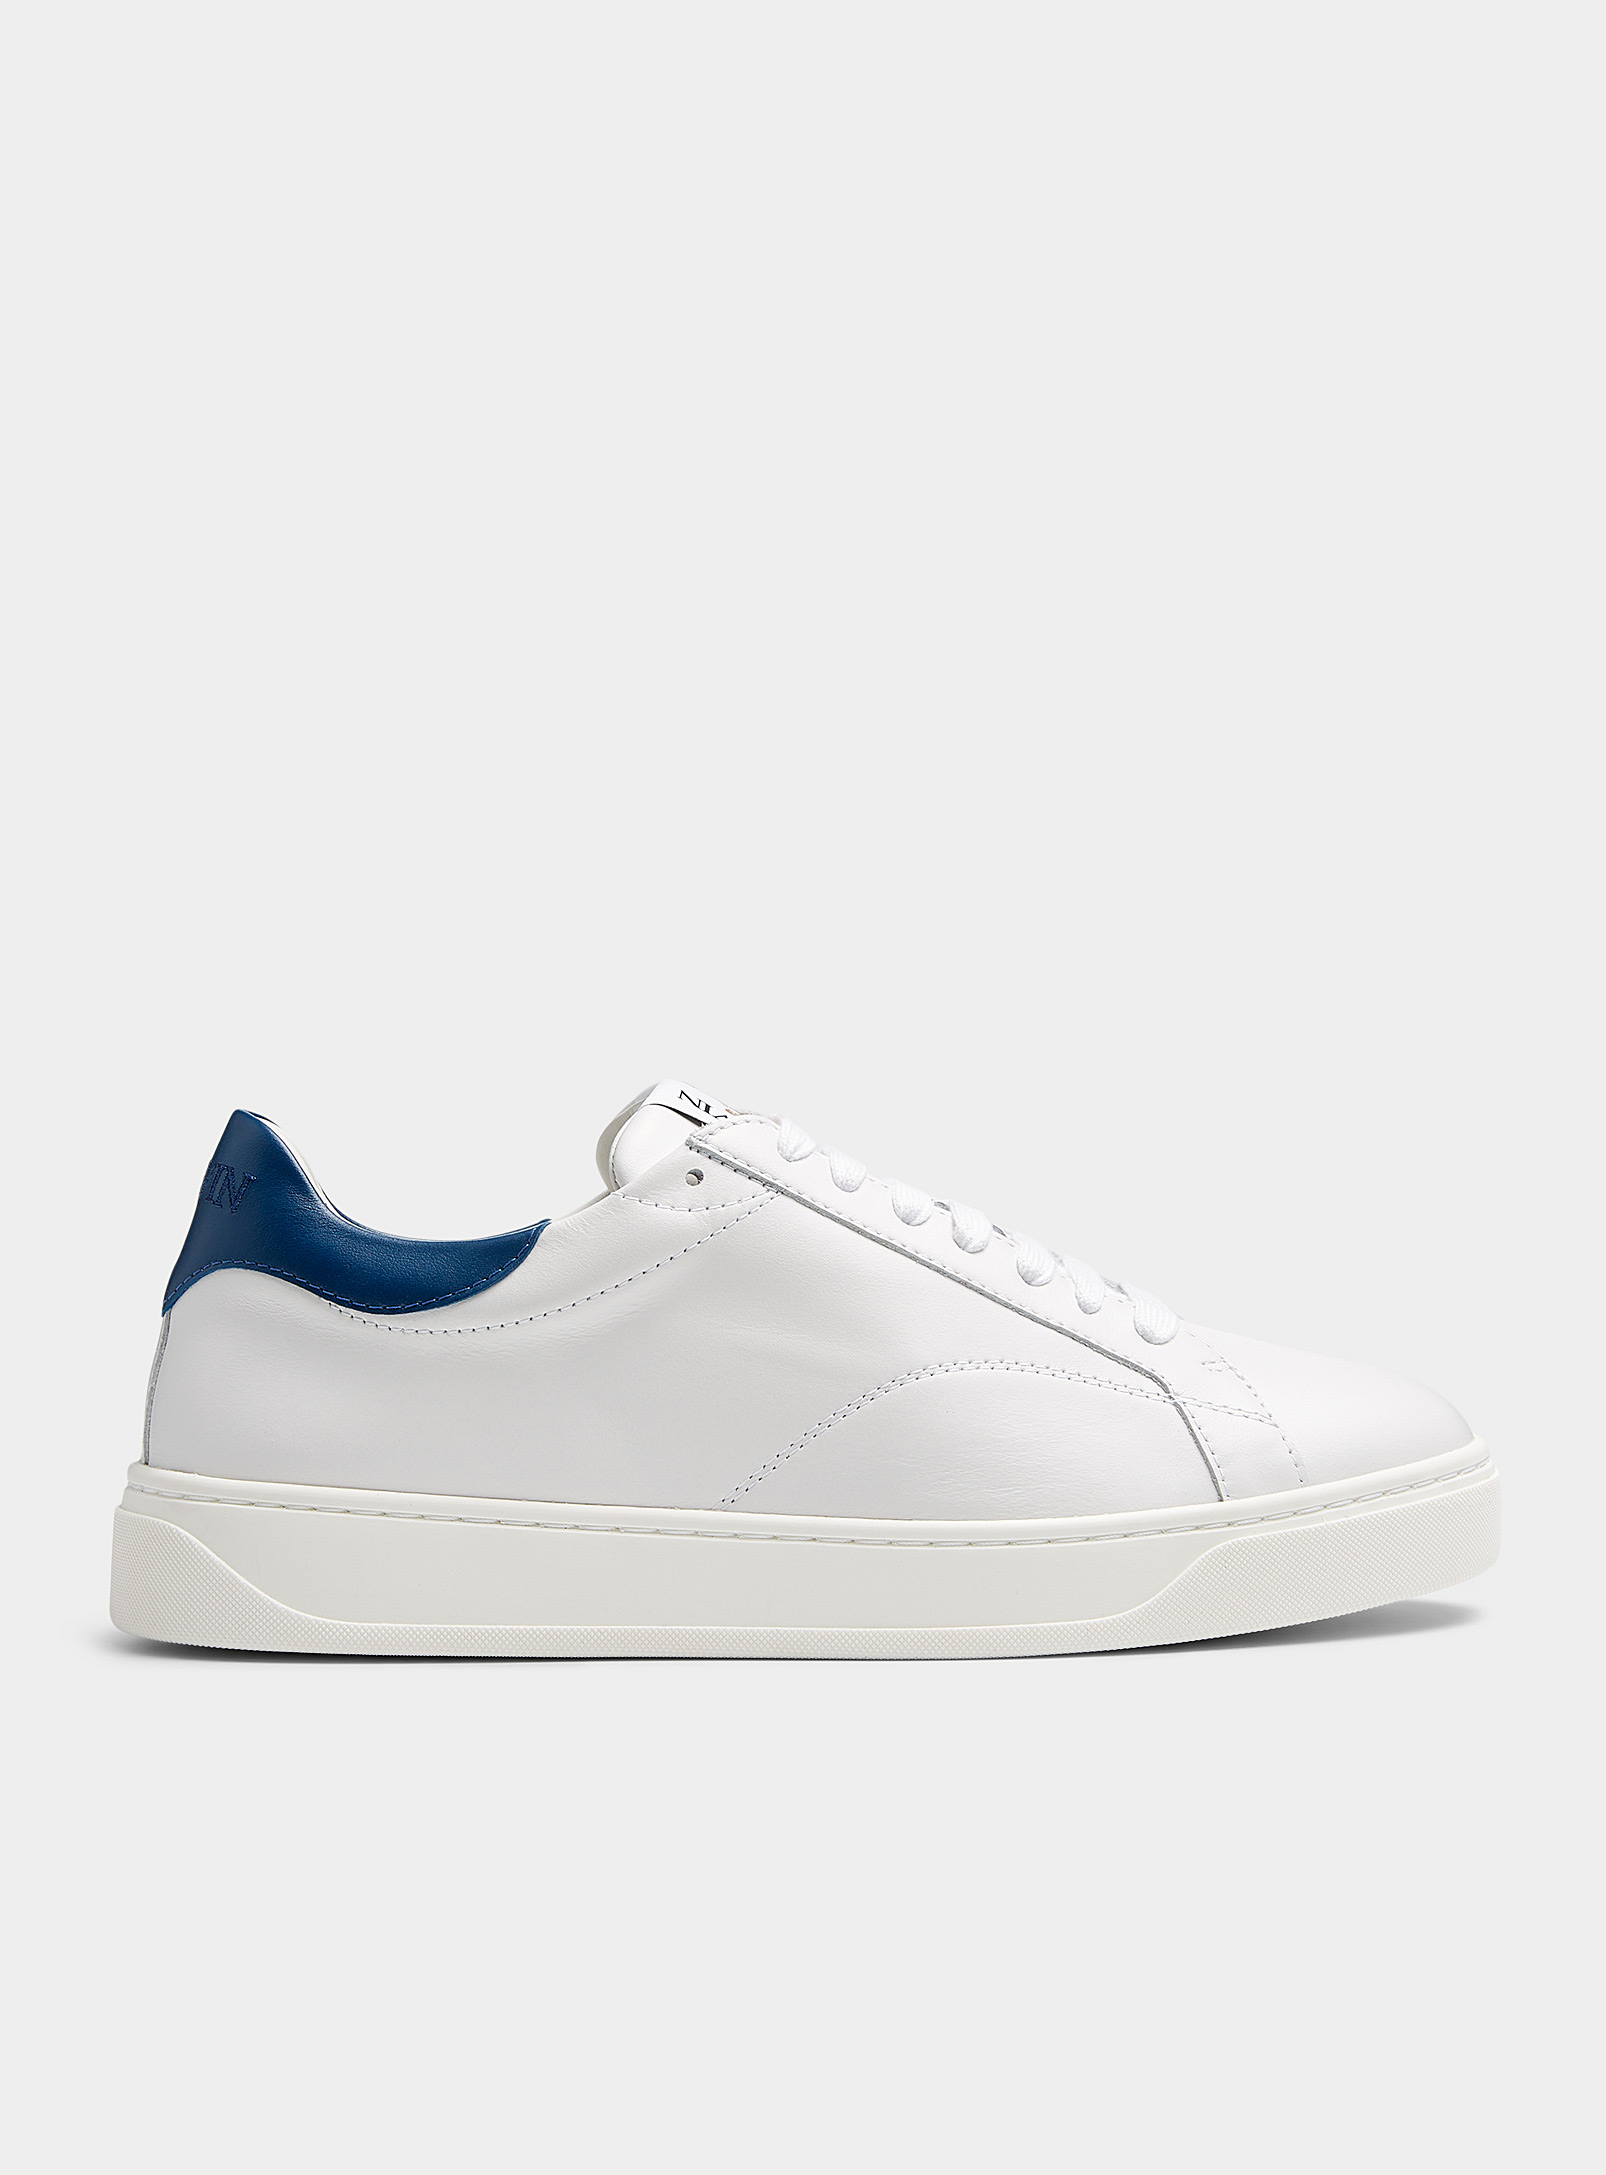 Lanvin - Men's White and navy leather DBB0 sneakers Men